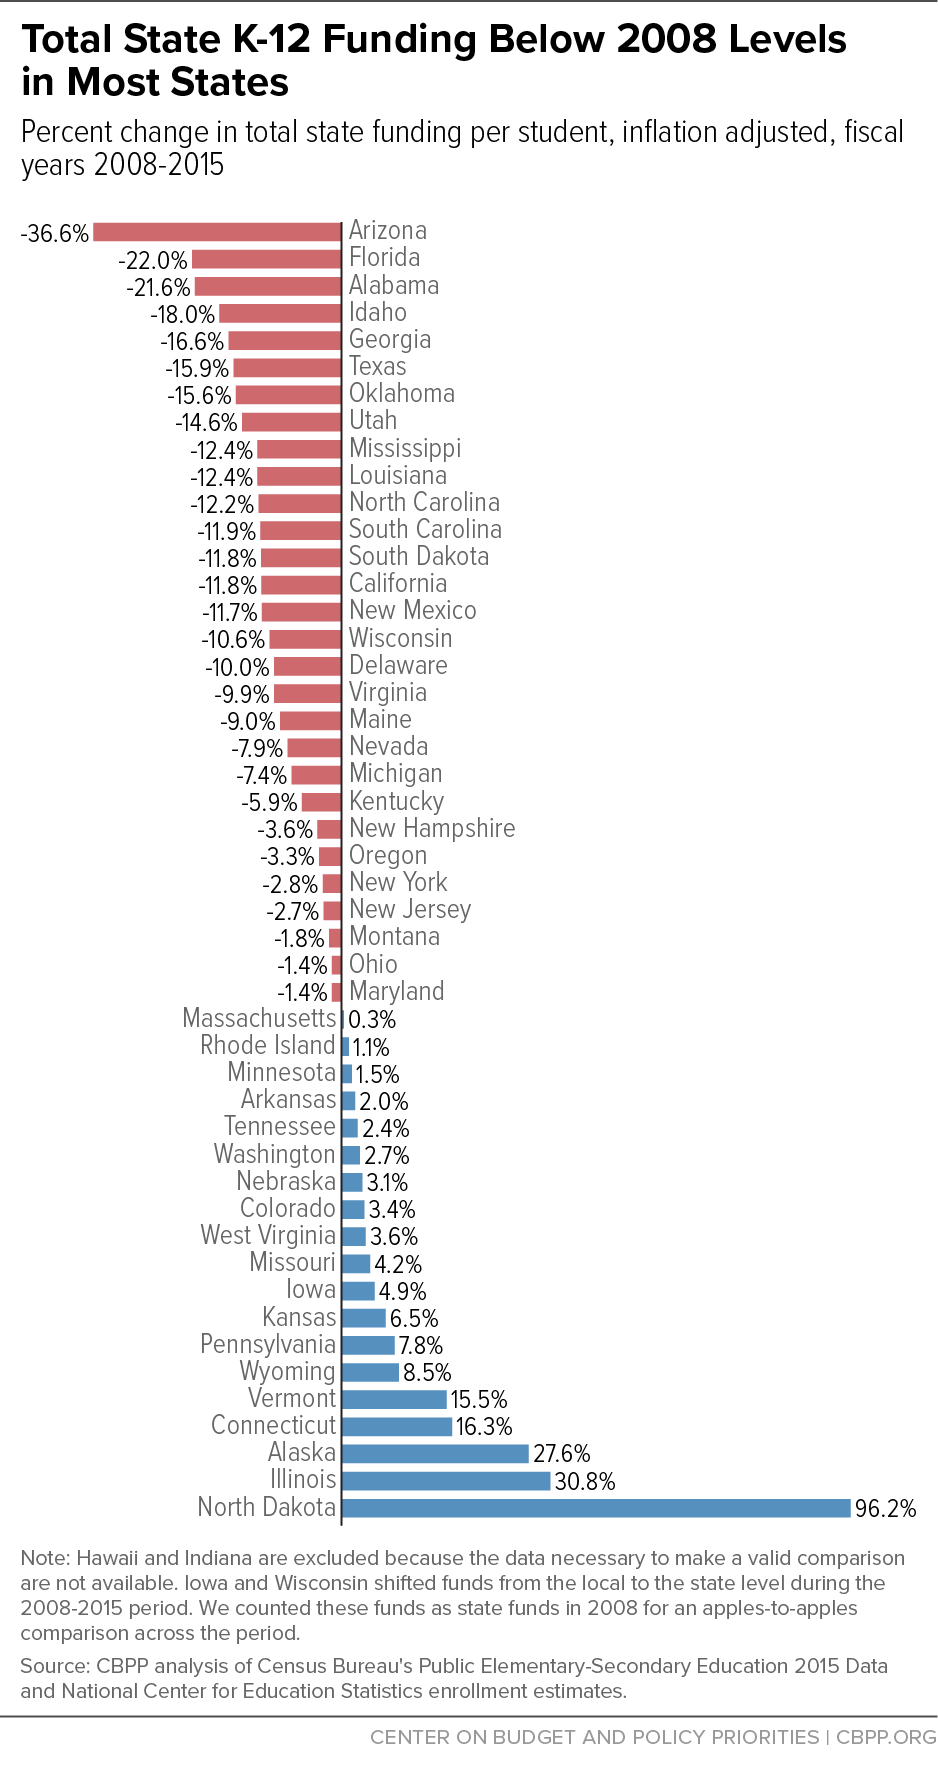 Total State K-12 Funding Below 2008 Levels in Most States